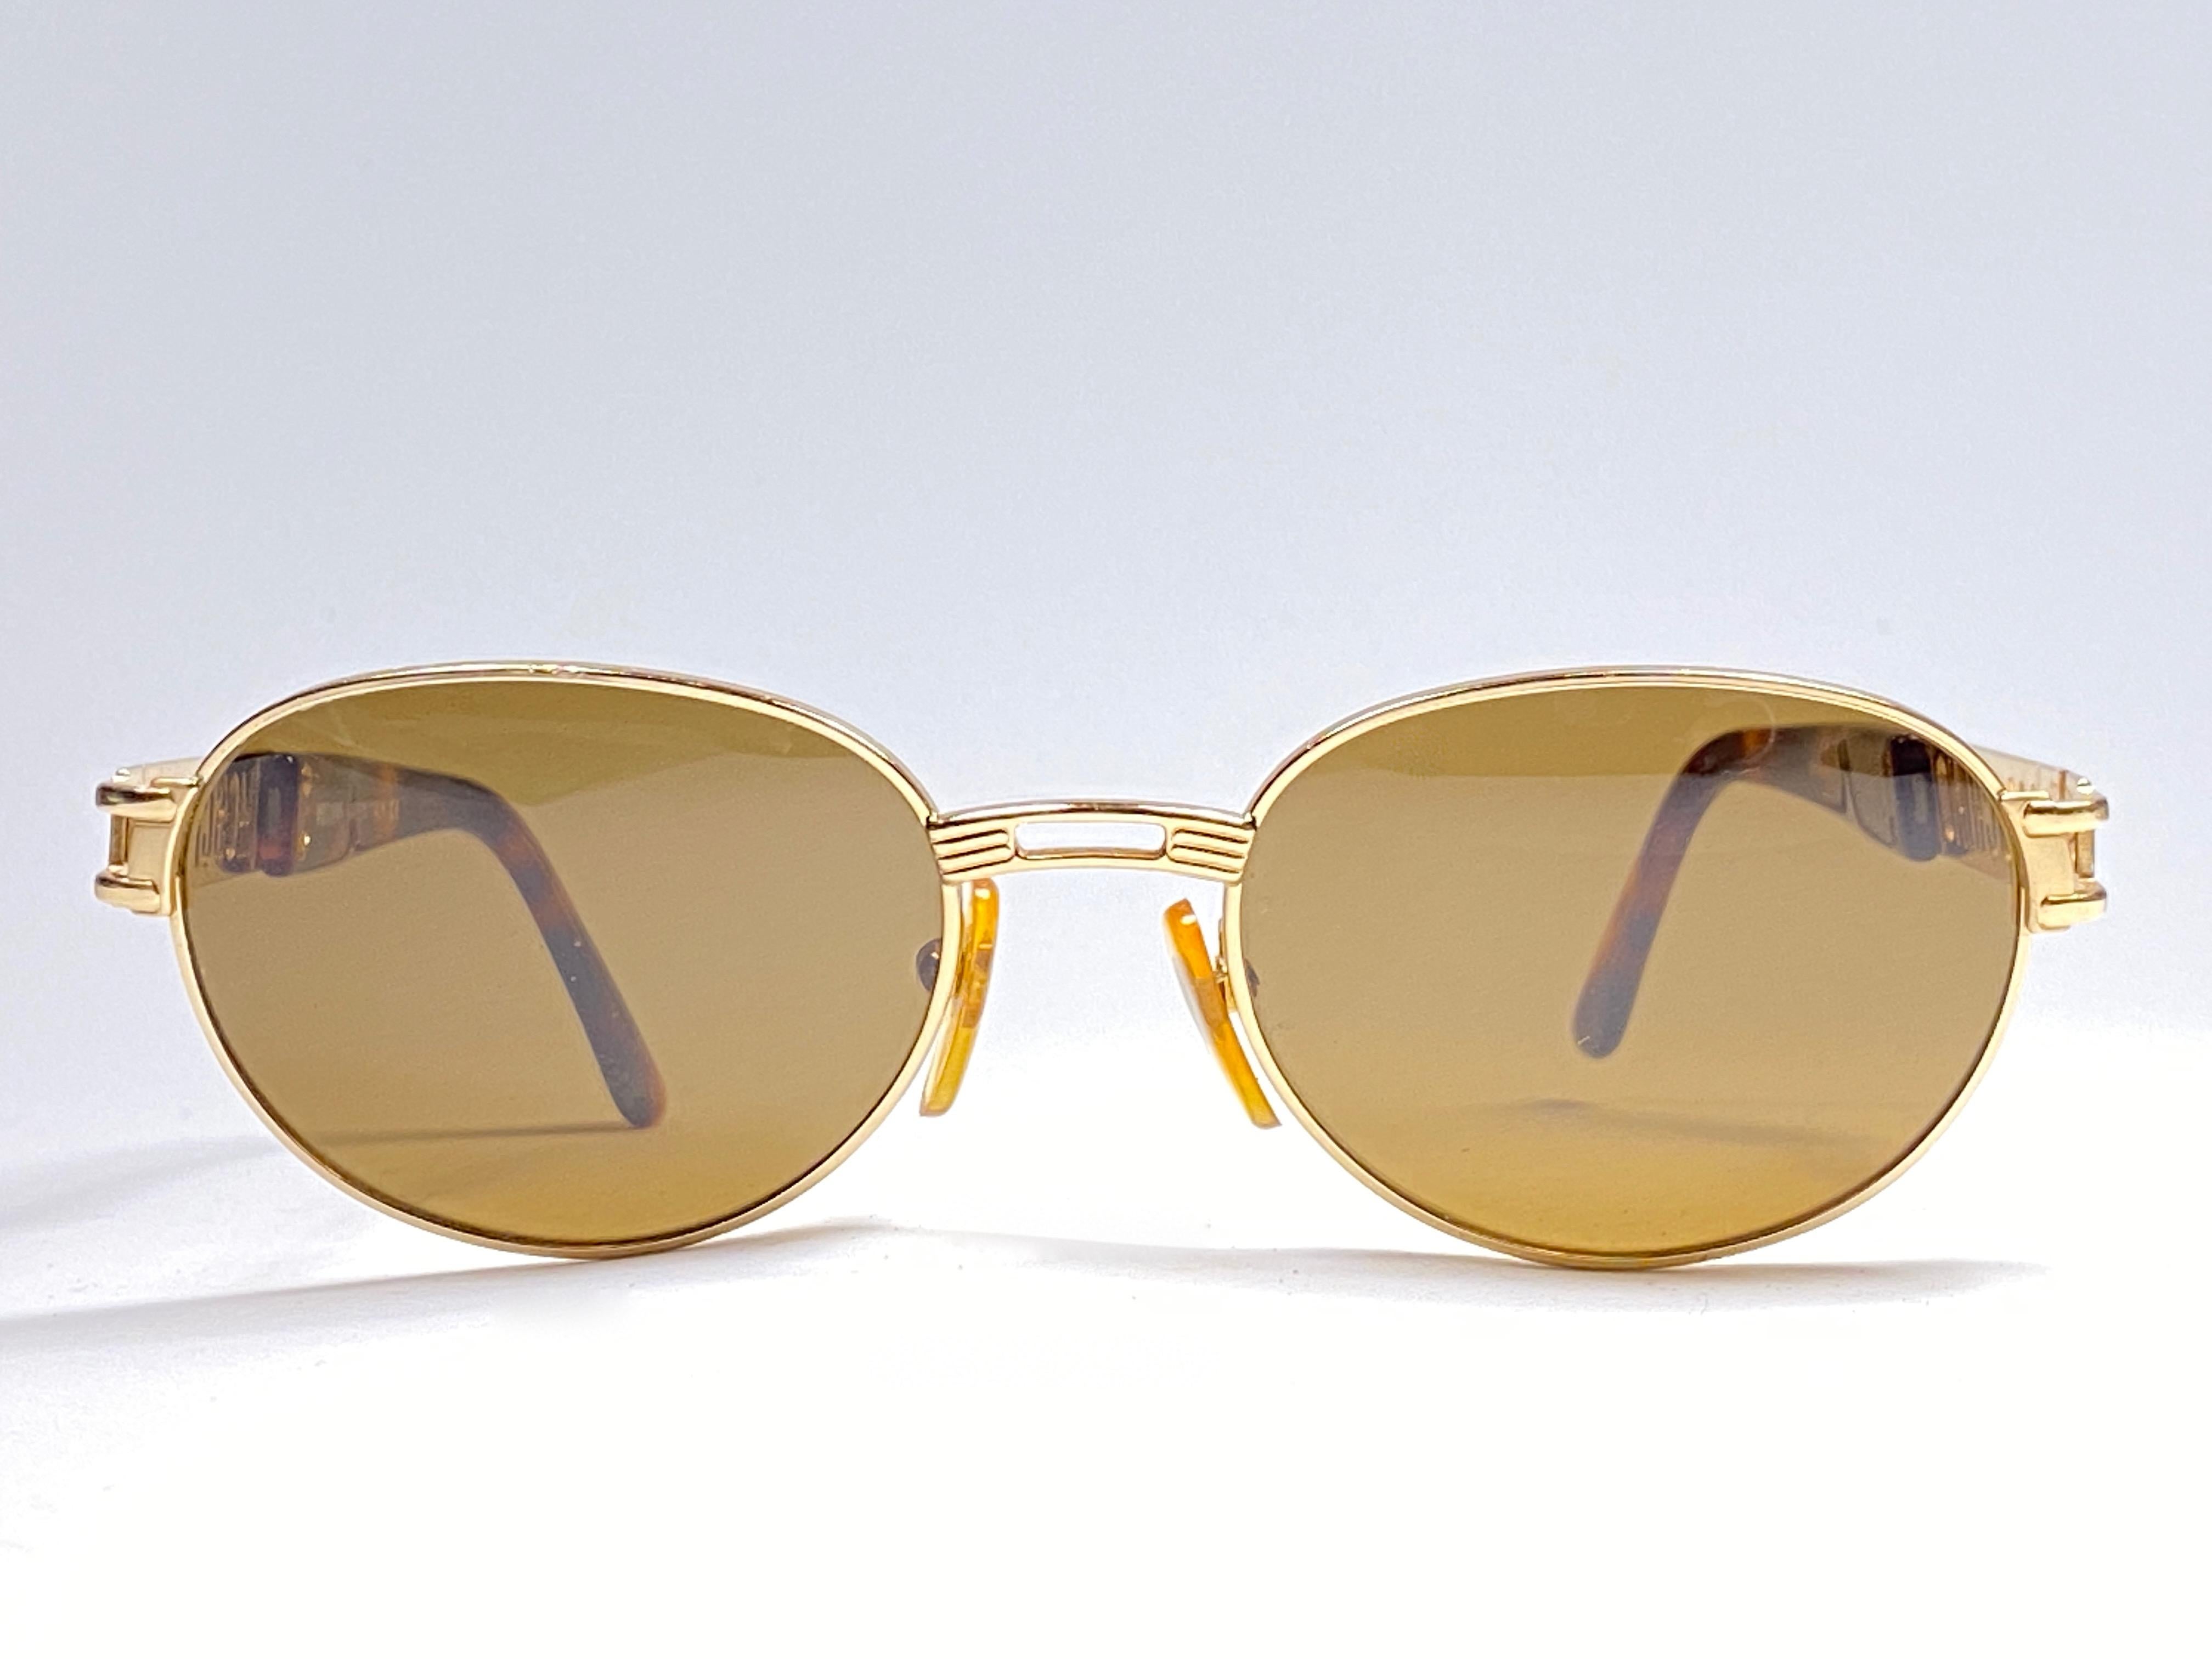 New Vintage Moschino small oval gold frame with G15 Grey lenses.

Made in Italy.
 
Produced and design in 1990's.

This item show minor sign of wear due to storage.
